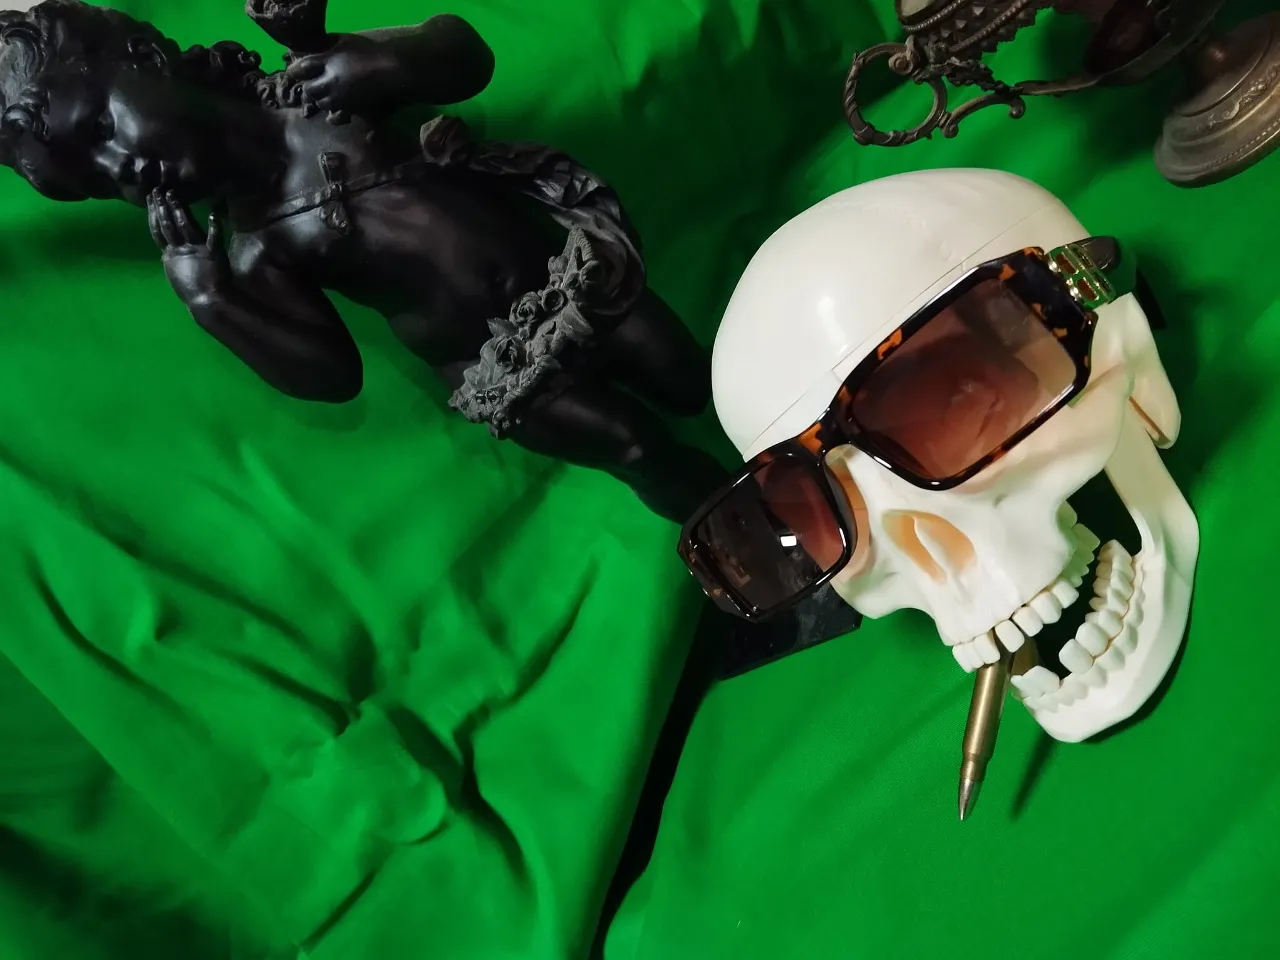 a fake skull wearing sunglasses and a white helmet